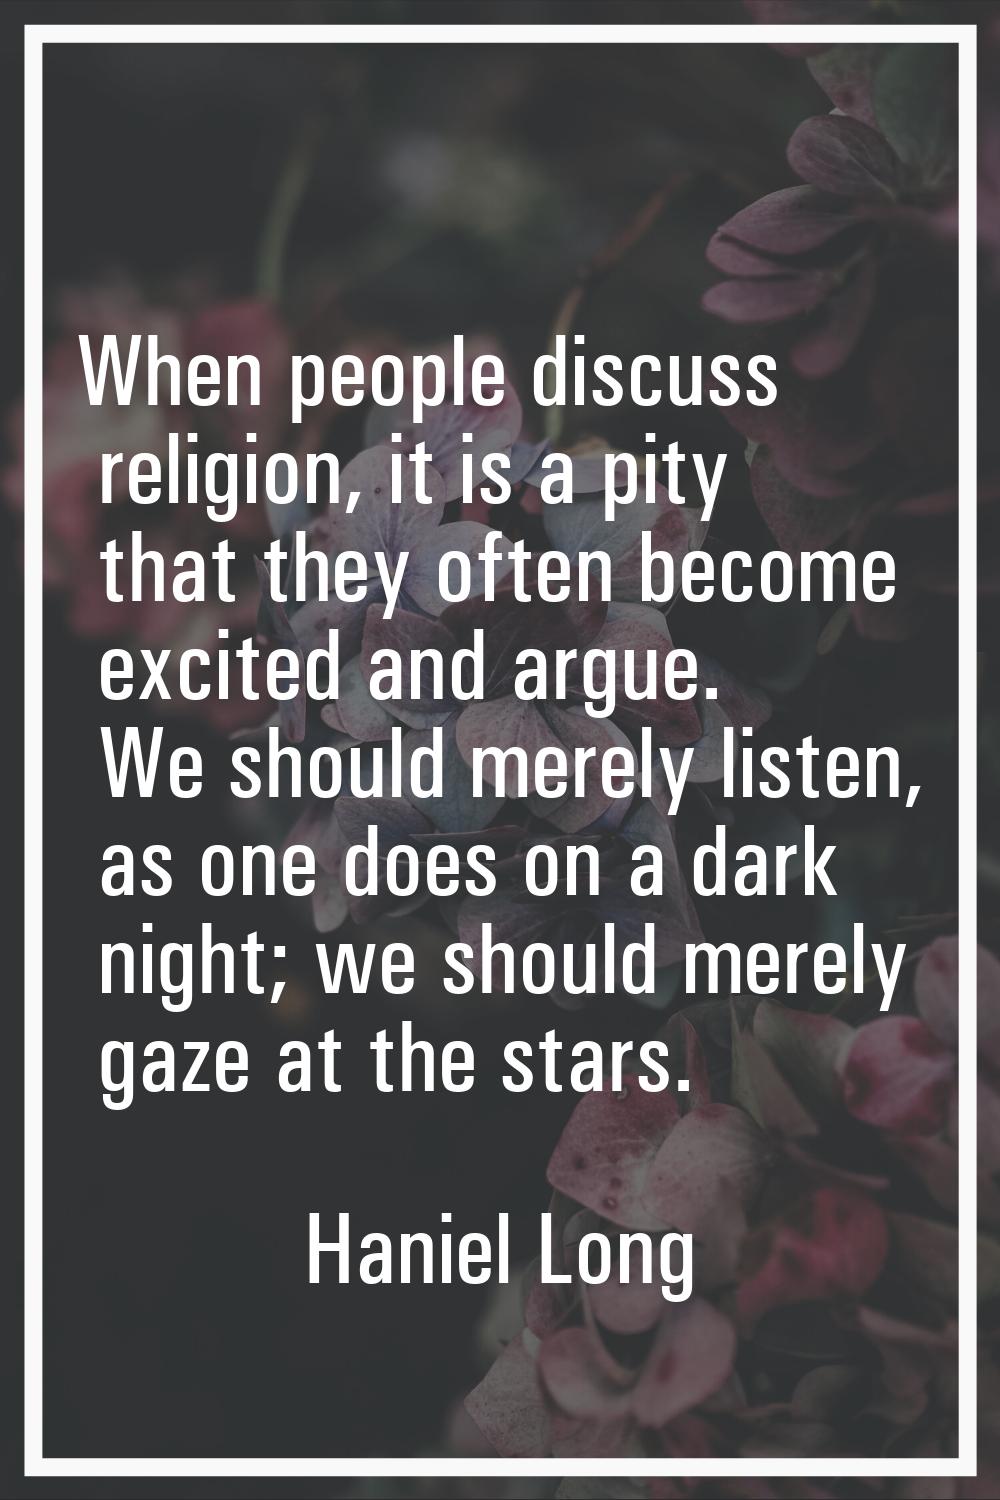 When people discuss religion, it is a pity that they often become excited and argue. We should mere